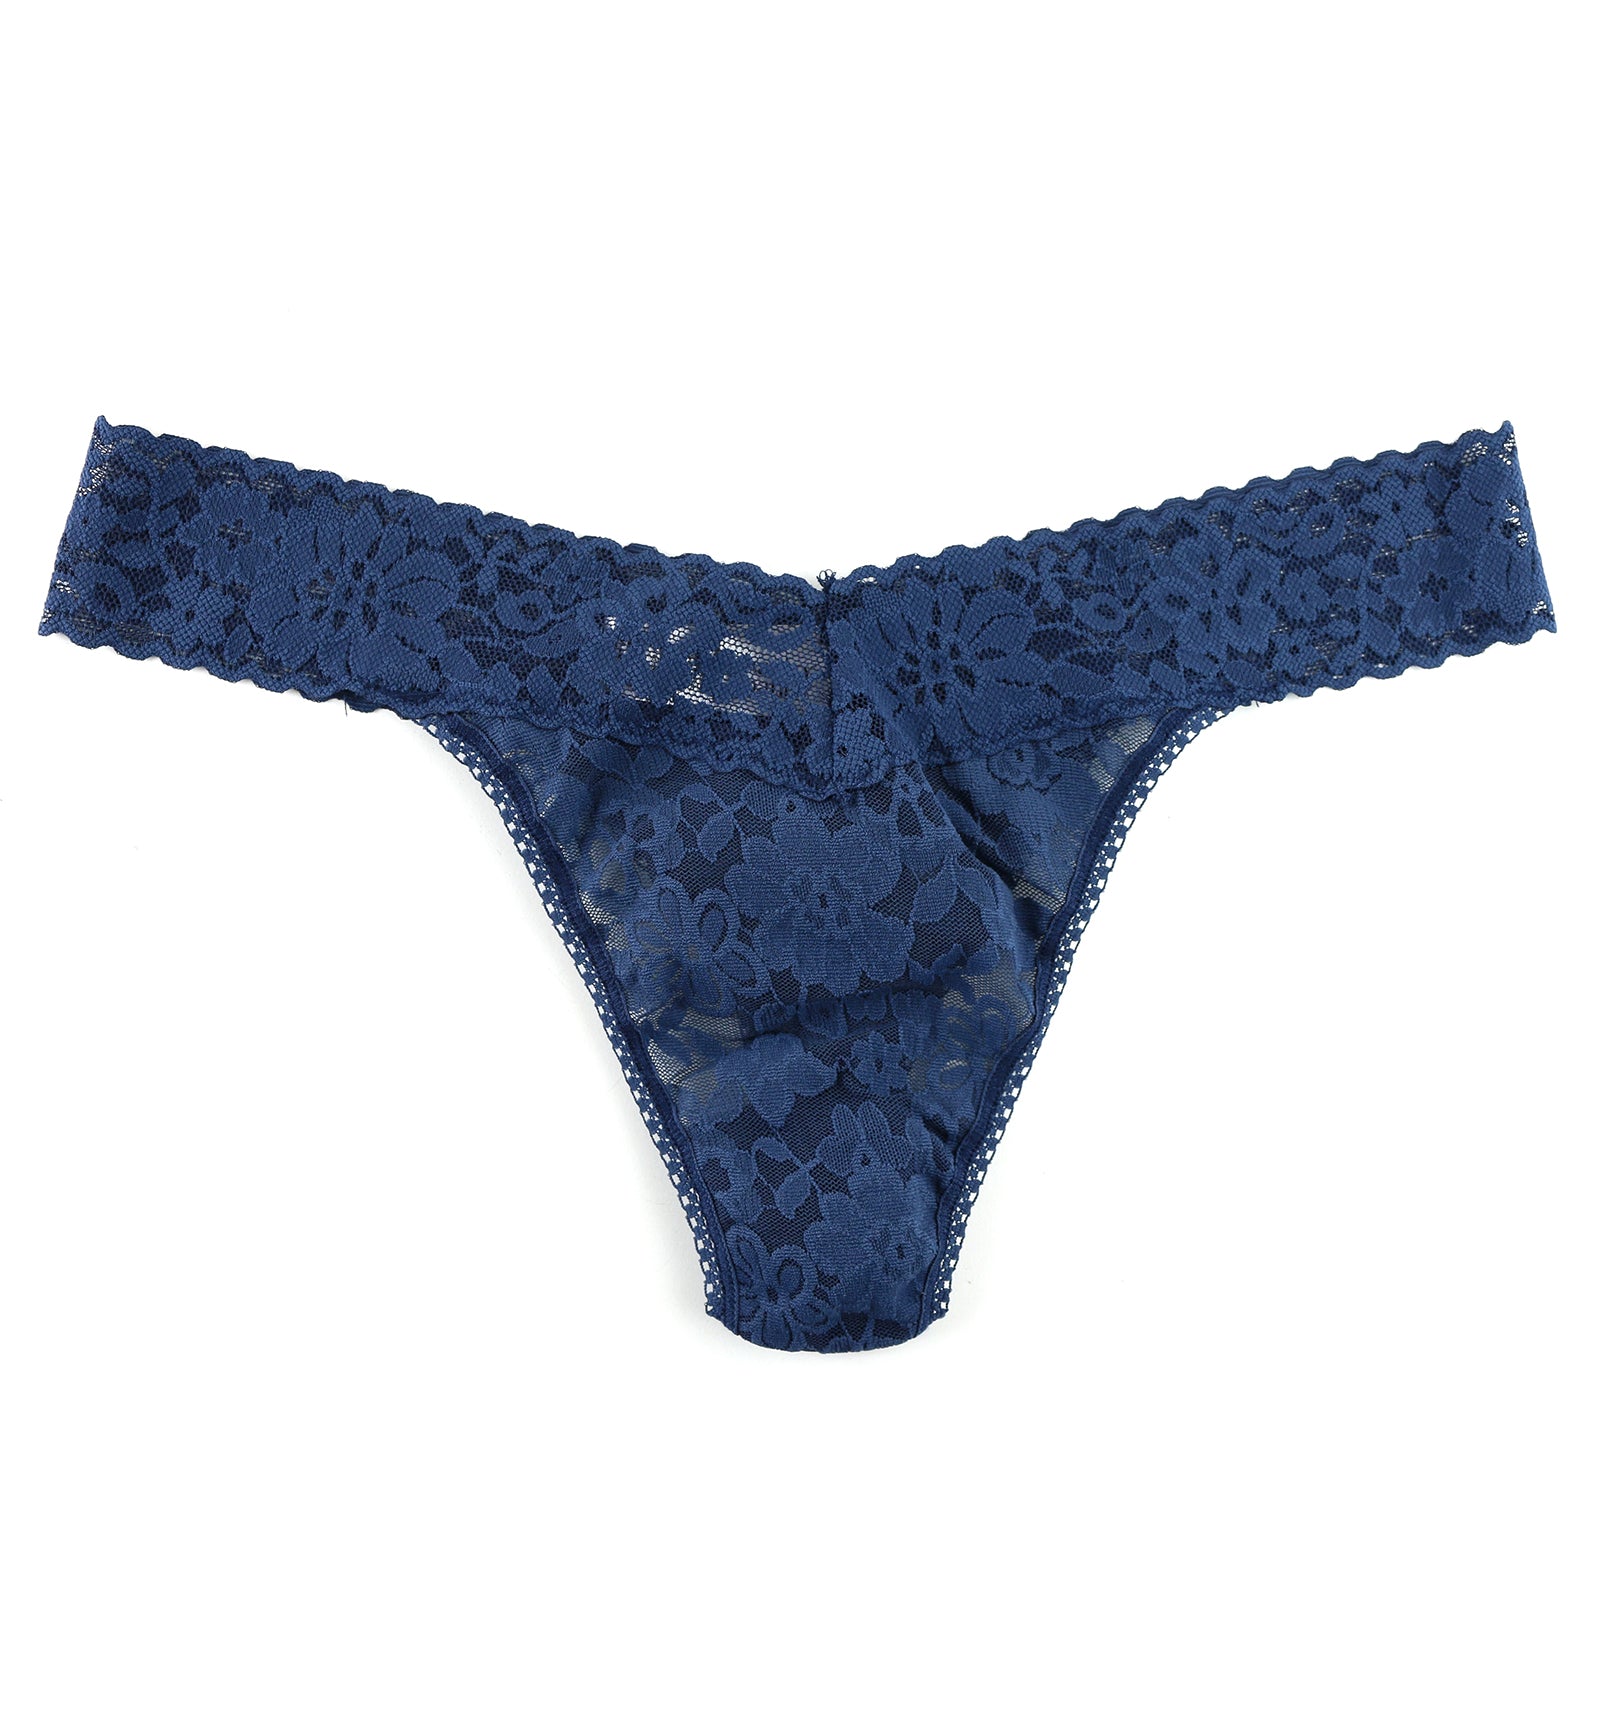 Hanky Panky Daily Lace Original Rise Thong (771101P),Nightshade - Nightshade,One Size